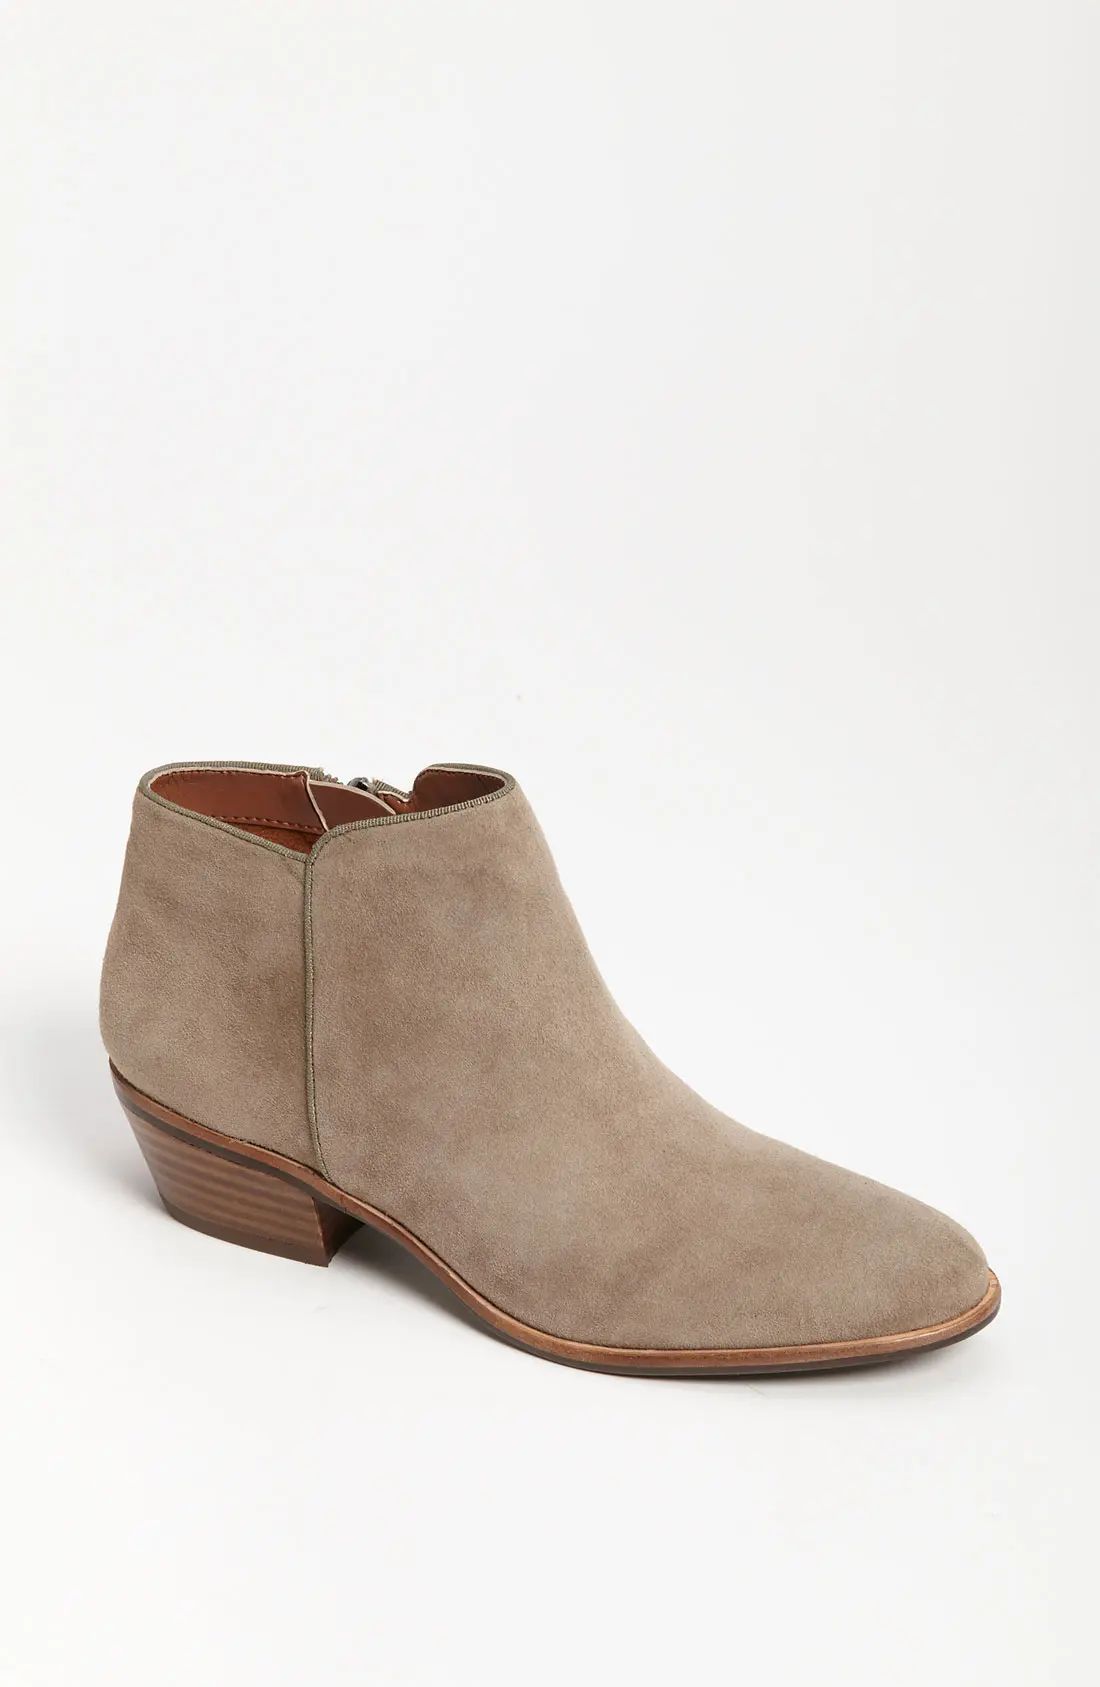 'Petty' Chelsea Boot | Nordstrom